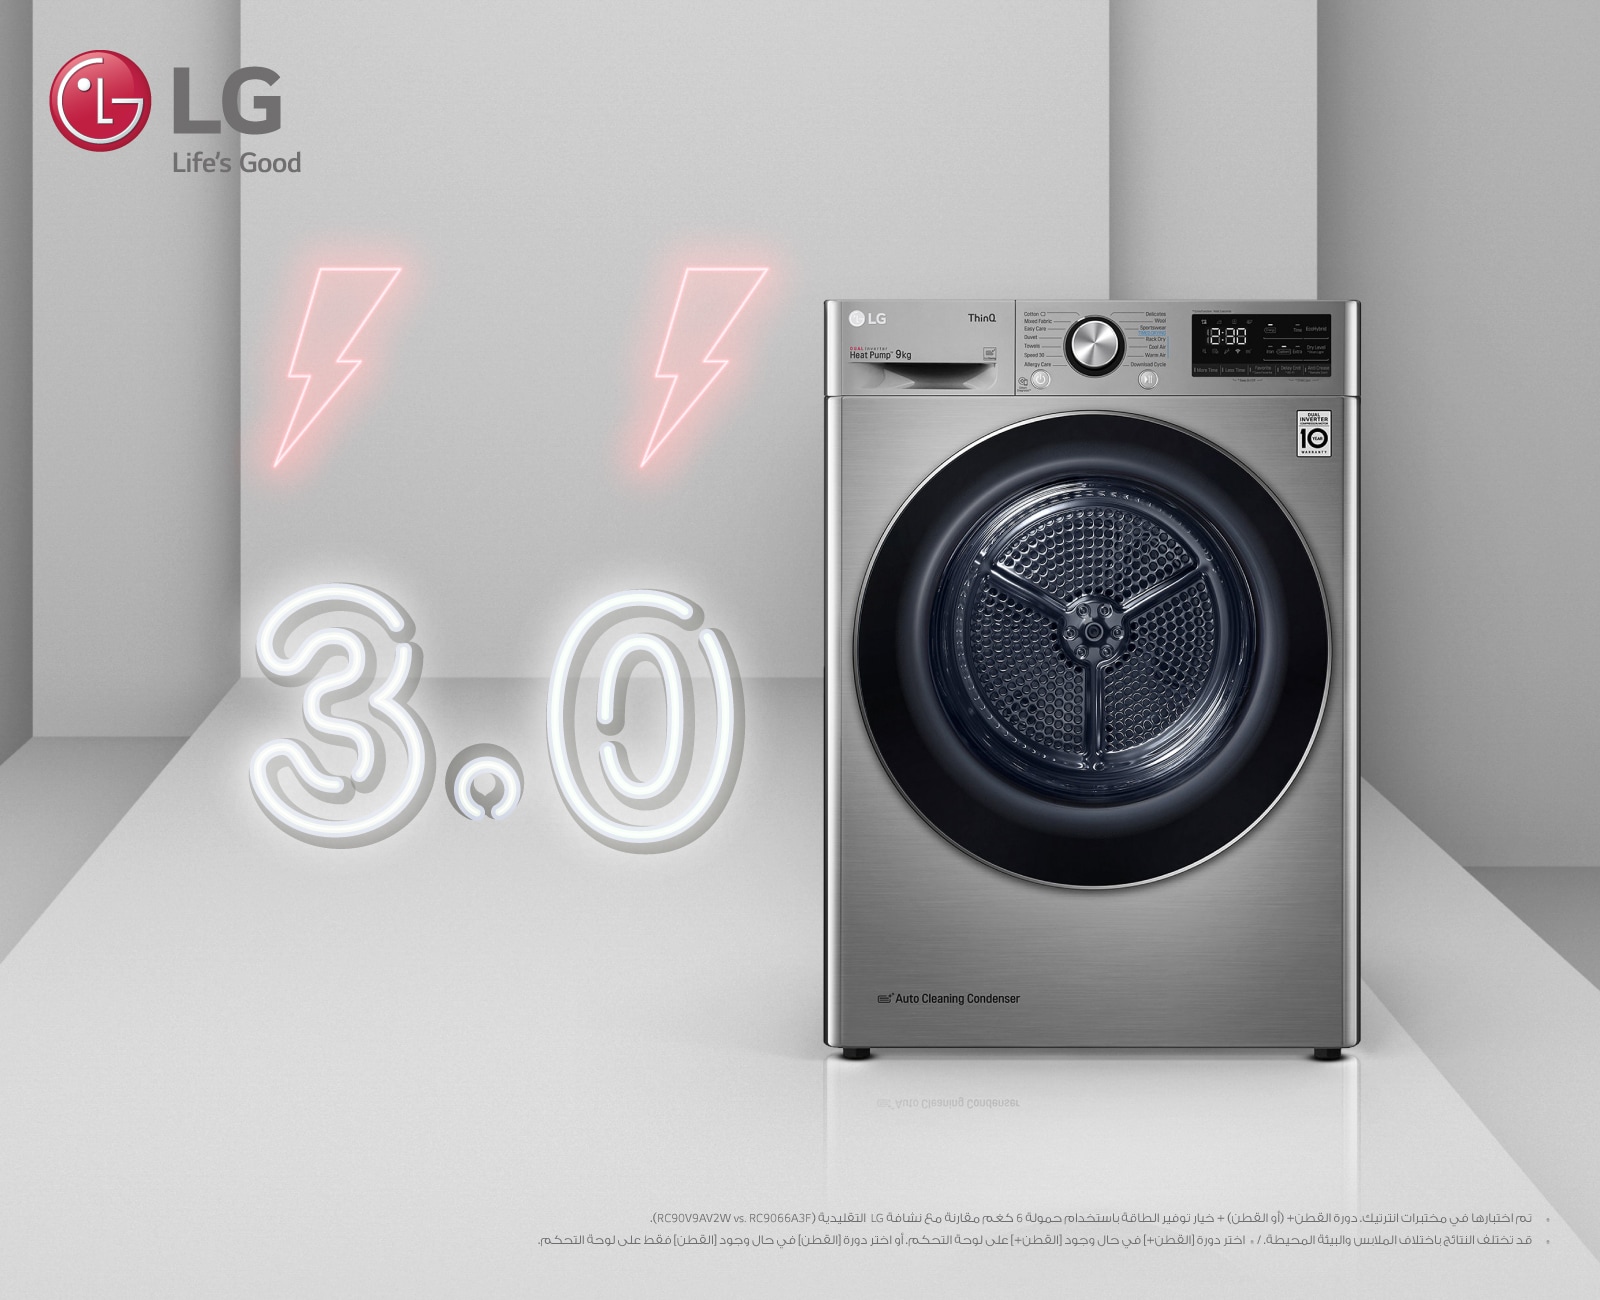 LG-Washer_Dryer-Web-Banners-Without-Text_1600x1300-Dryer